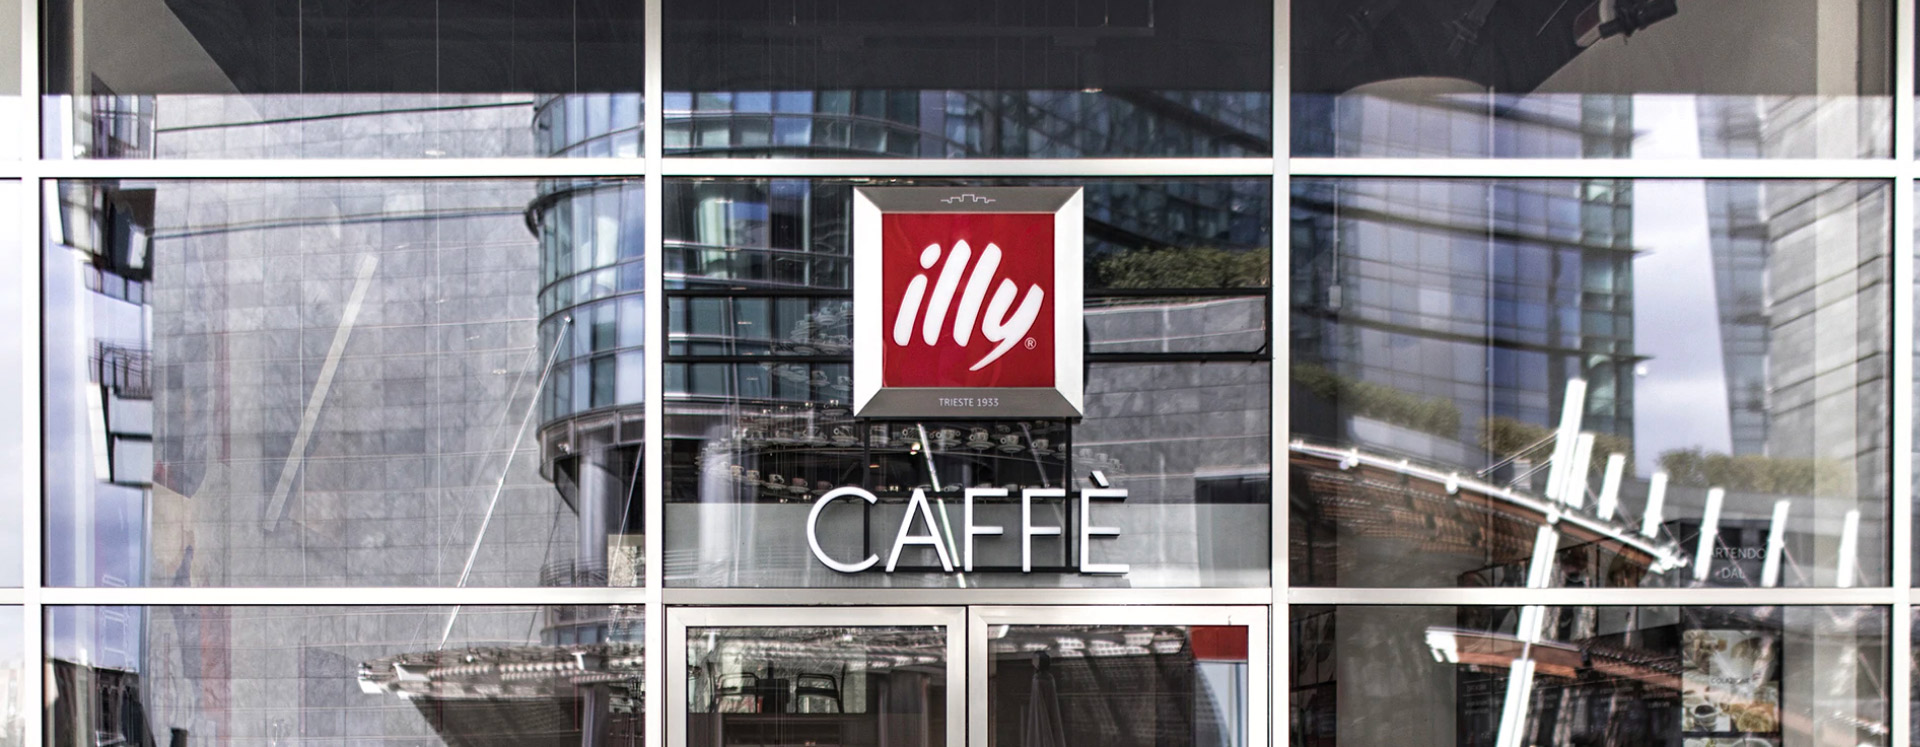 21.04.01_franchising-illy-caffe_hero-banner_1920x747